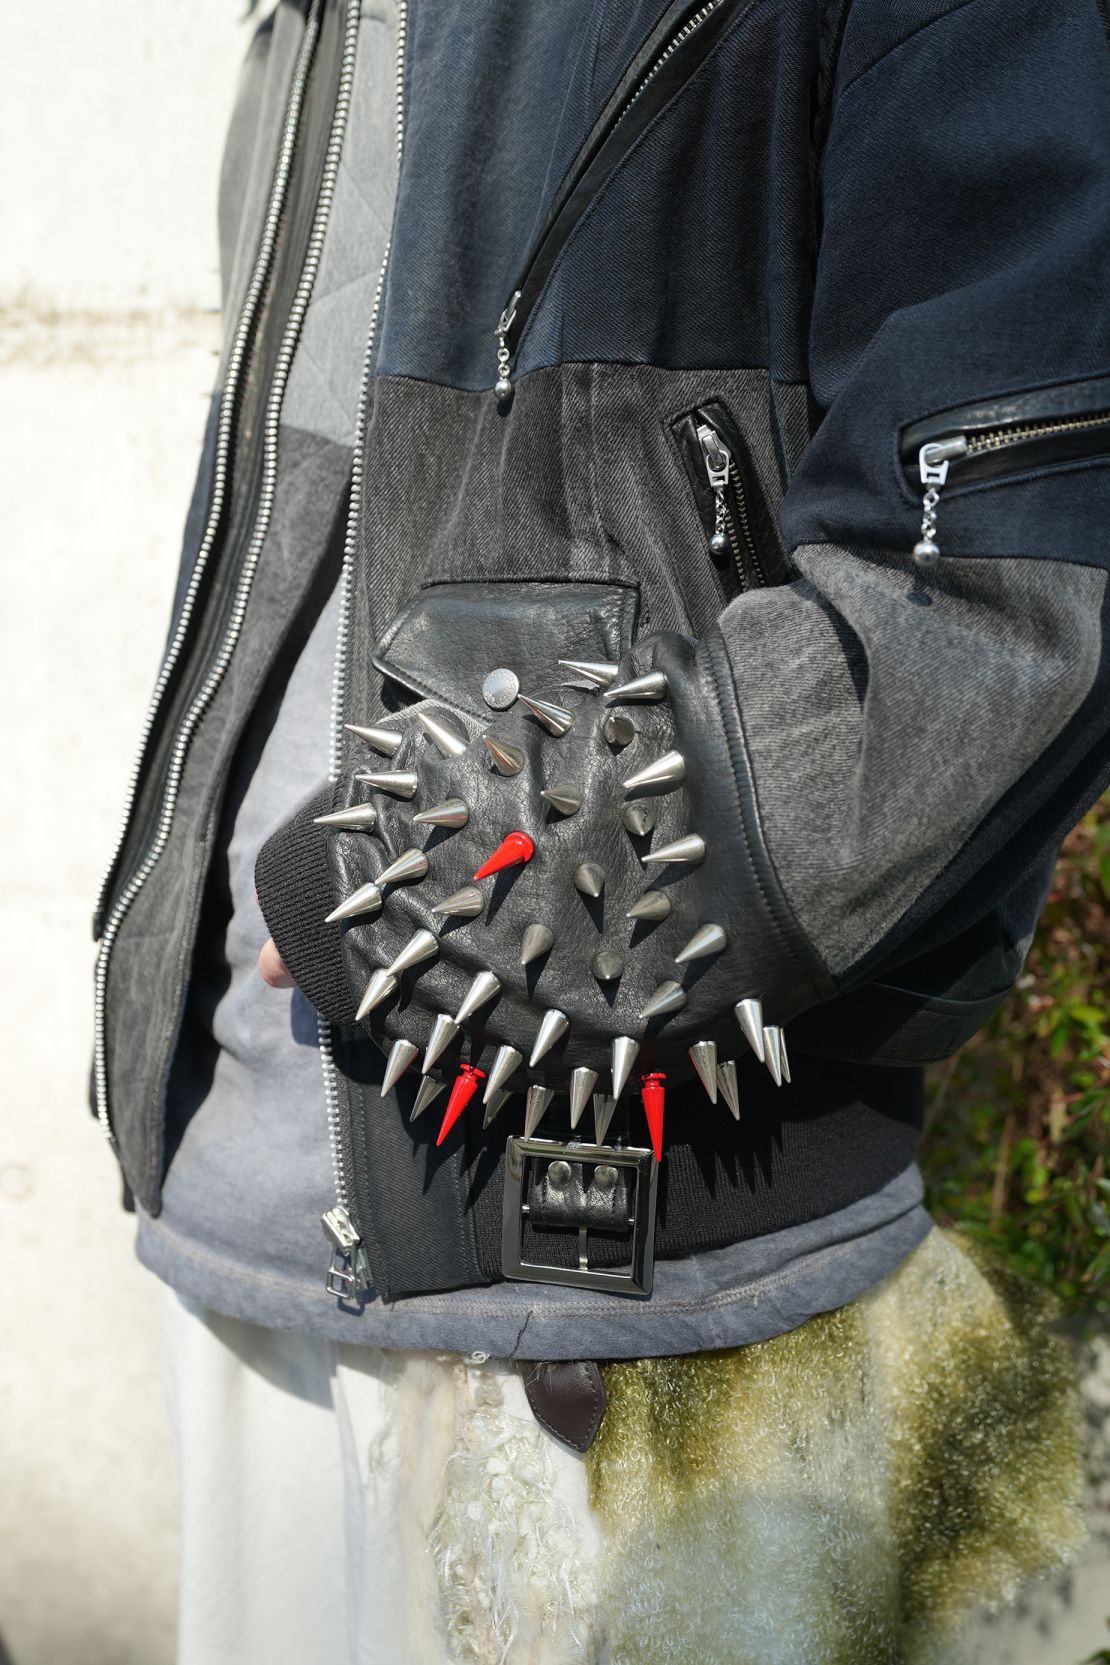 The spiked sleeves of Soga Takahashi’s gothic-inspired Hiro jacket. “Challenging and chaotic are my themes,” he said, describing his personal style.